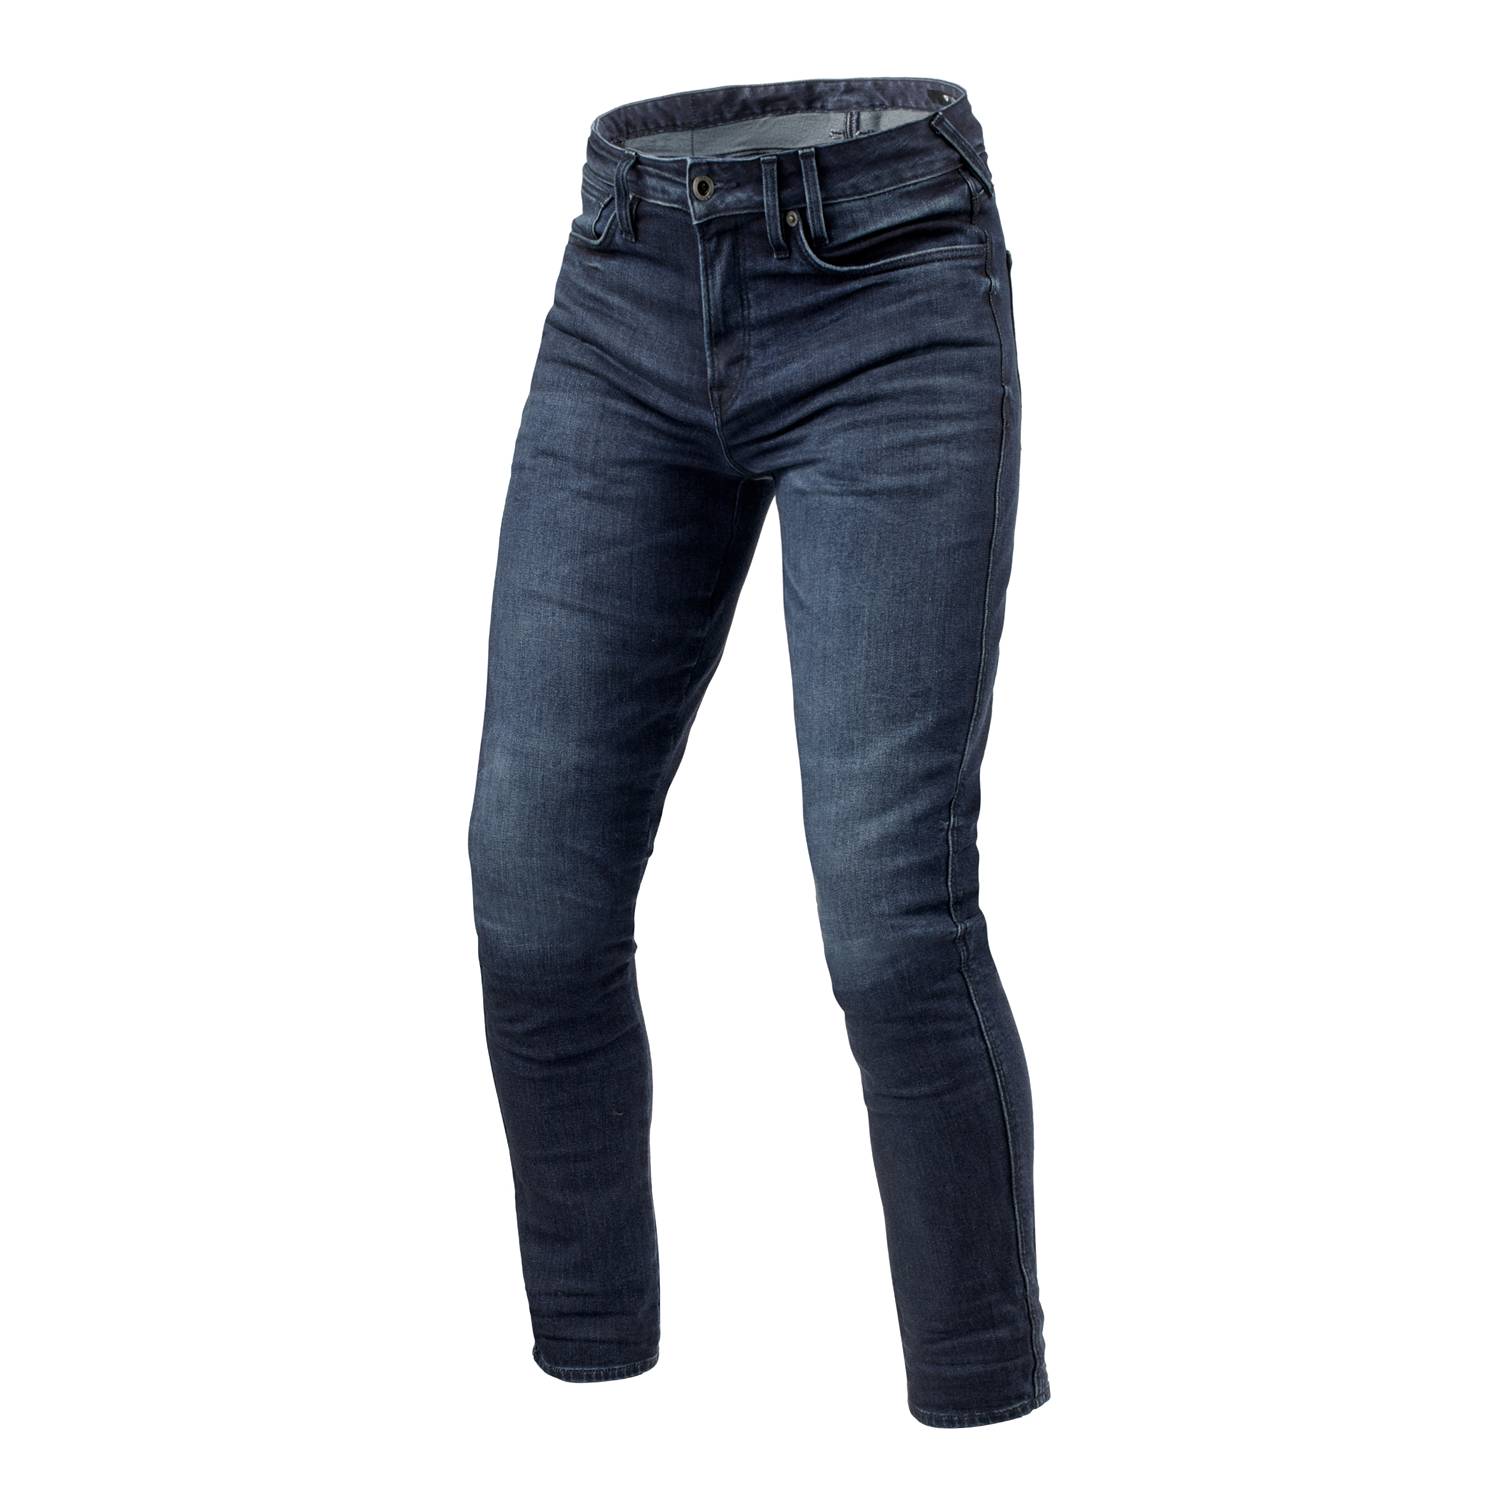 Image of EU REV'IT! Jeans Carlin SK Dark Blue Used L36 Motorcycle Jeans Taille L36/W31